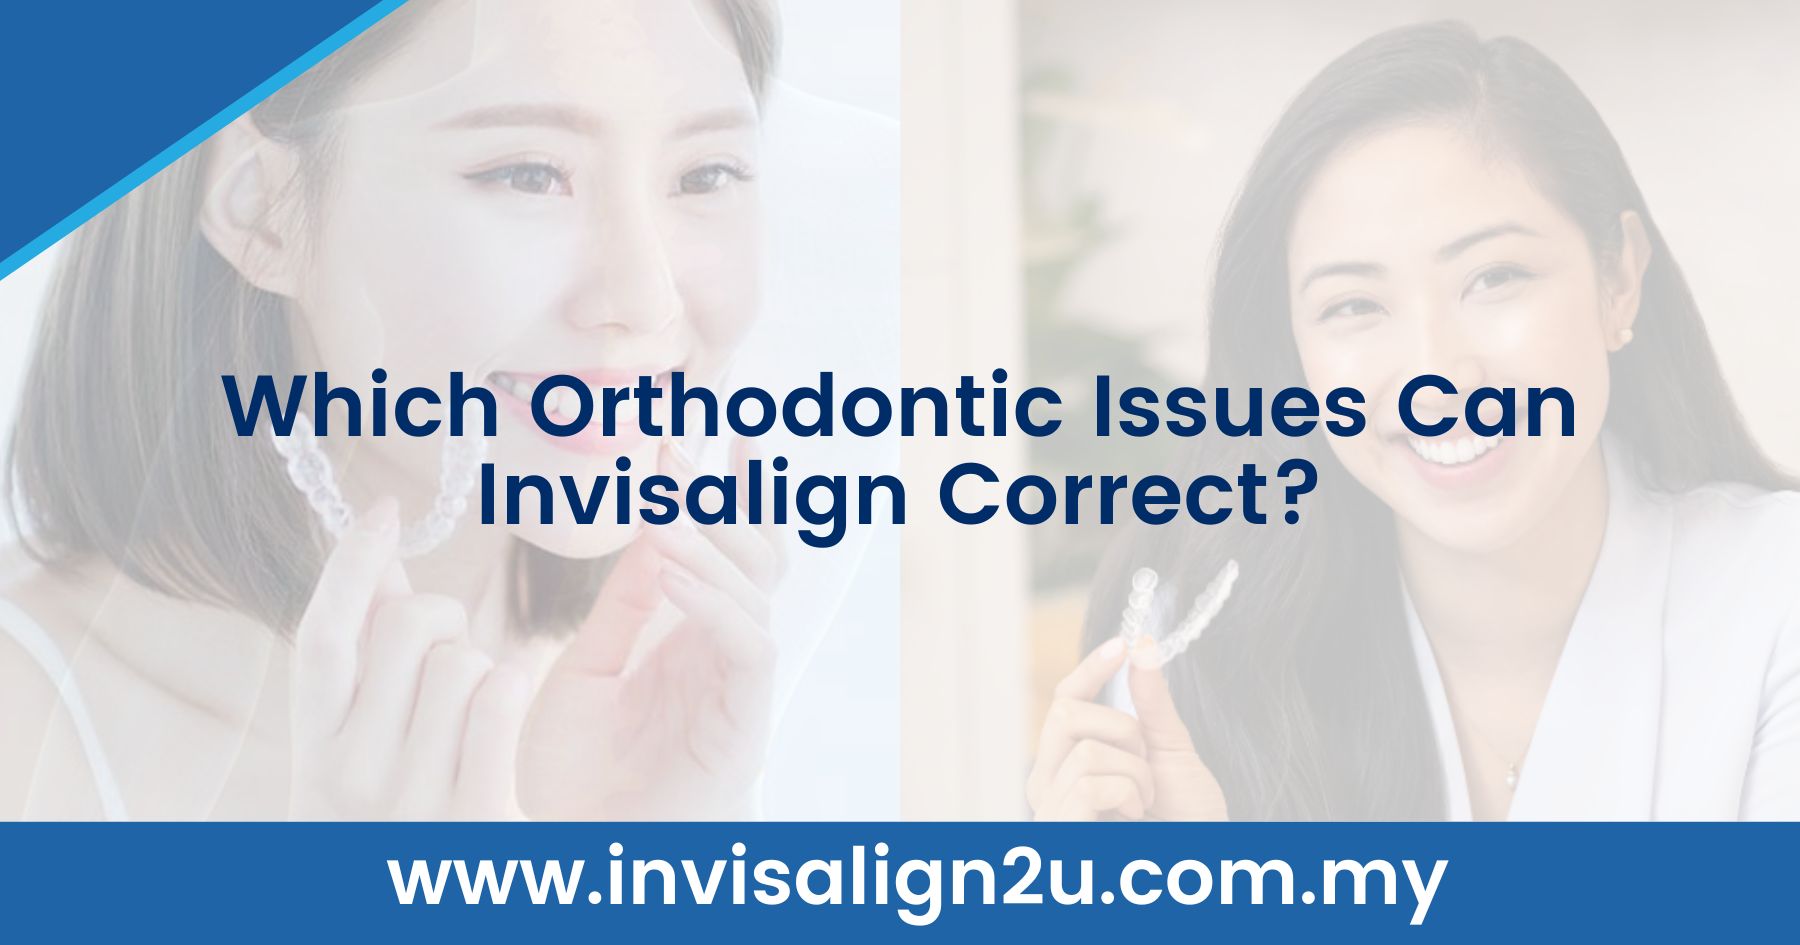 Which Orthodontic Issues Can Invisalign Correct?